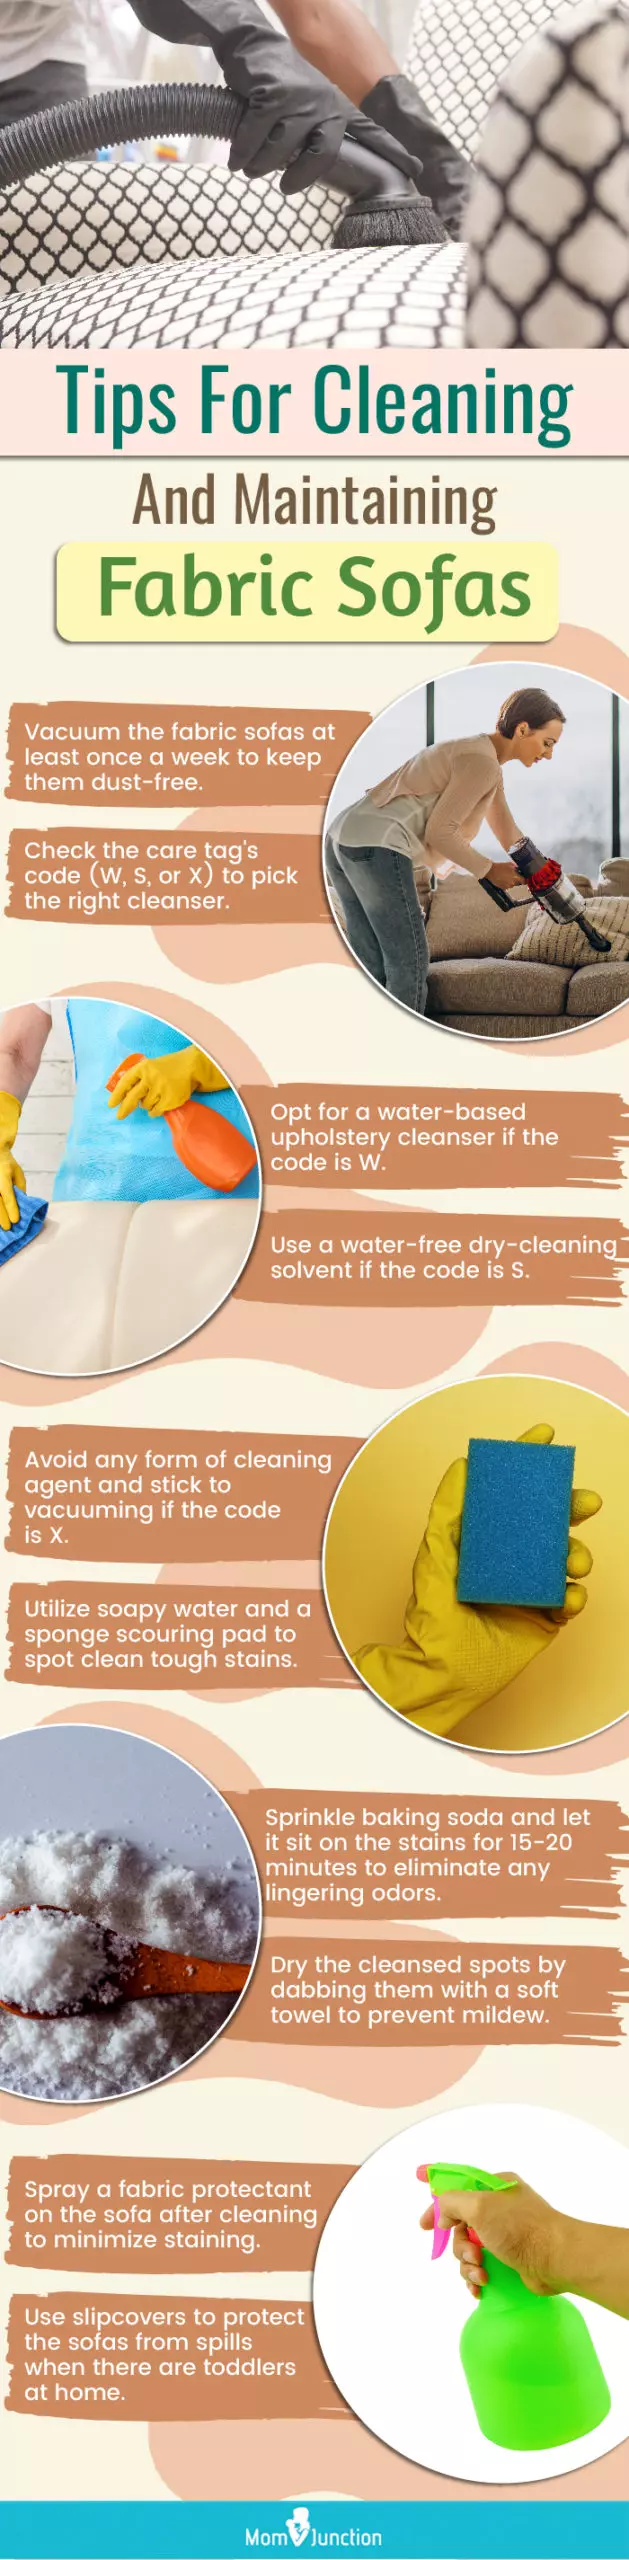 Tips For Cleaning And Maintaining Fabric Sofas (infographic)